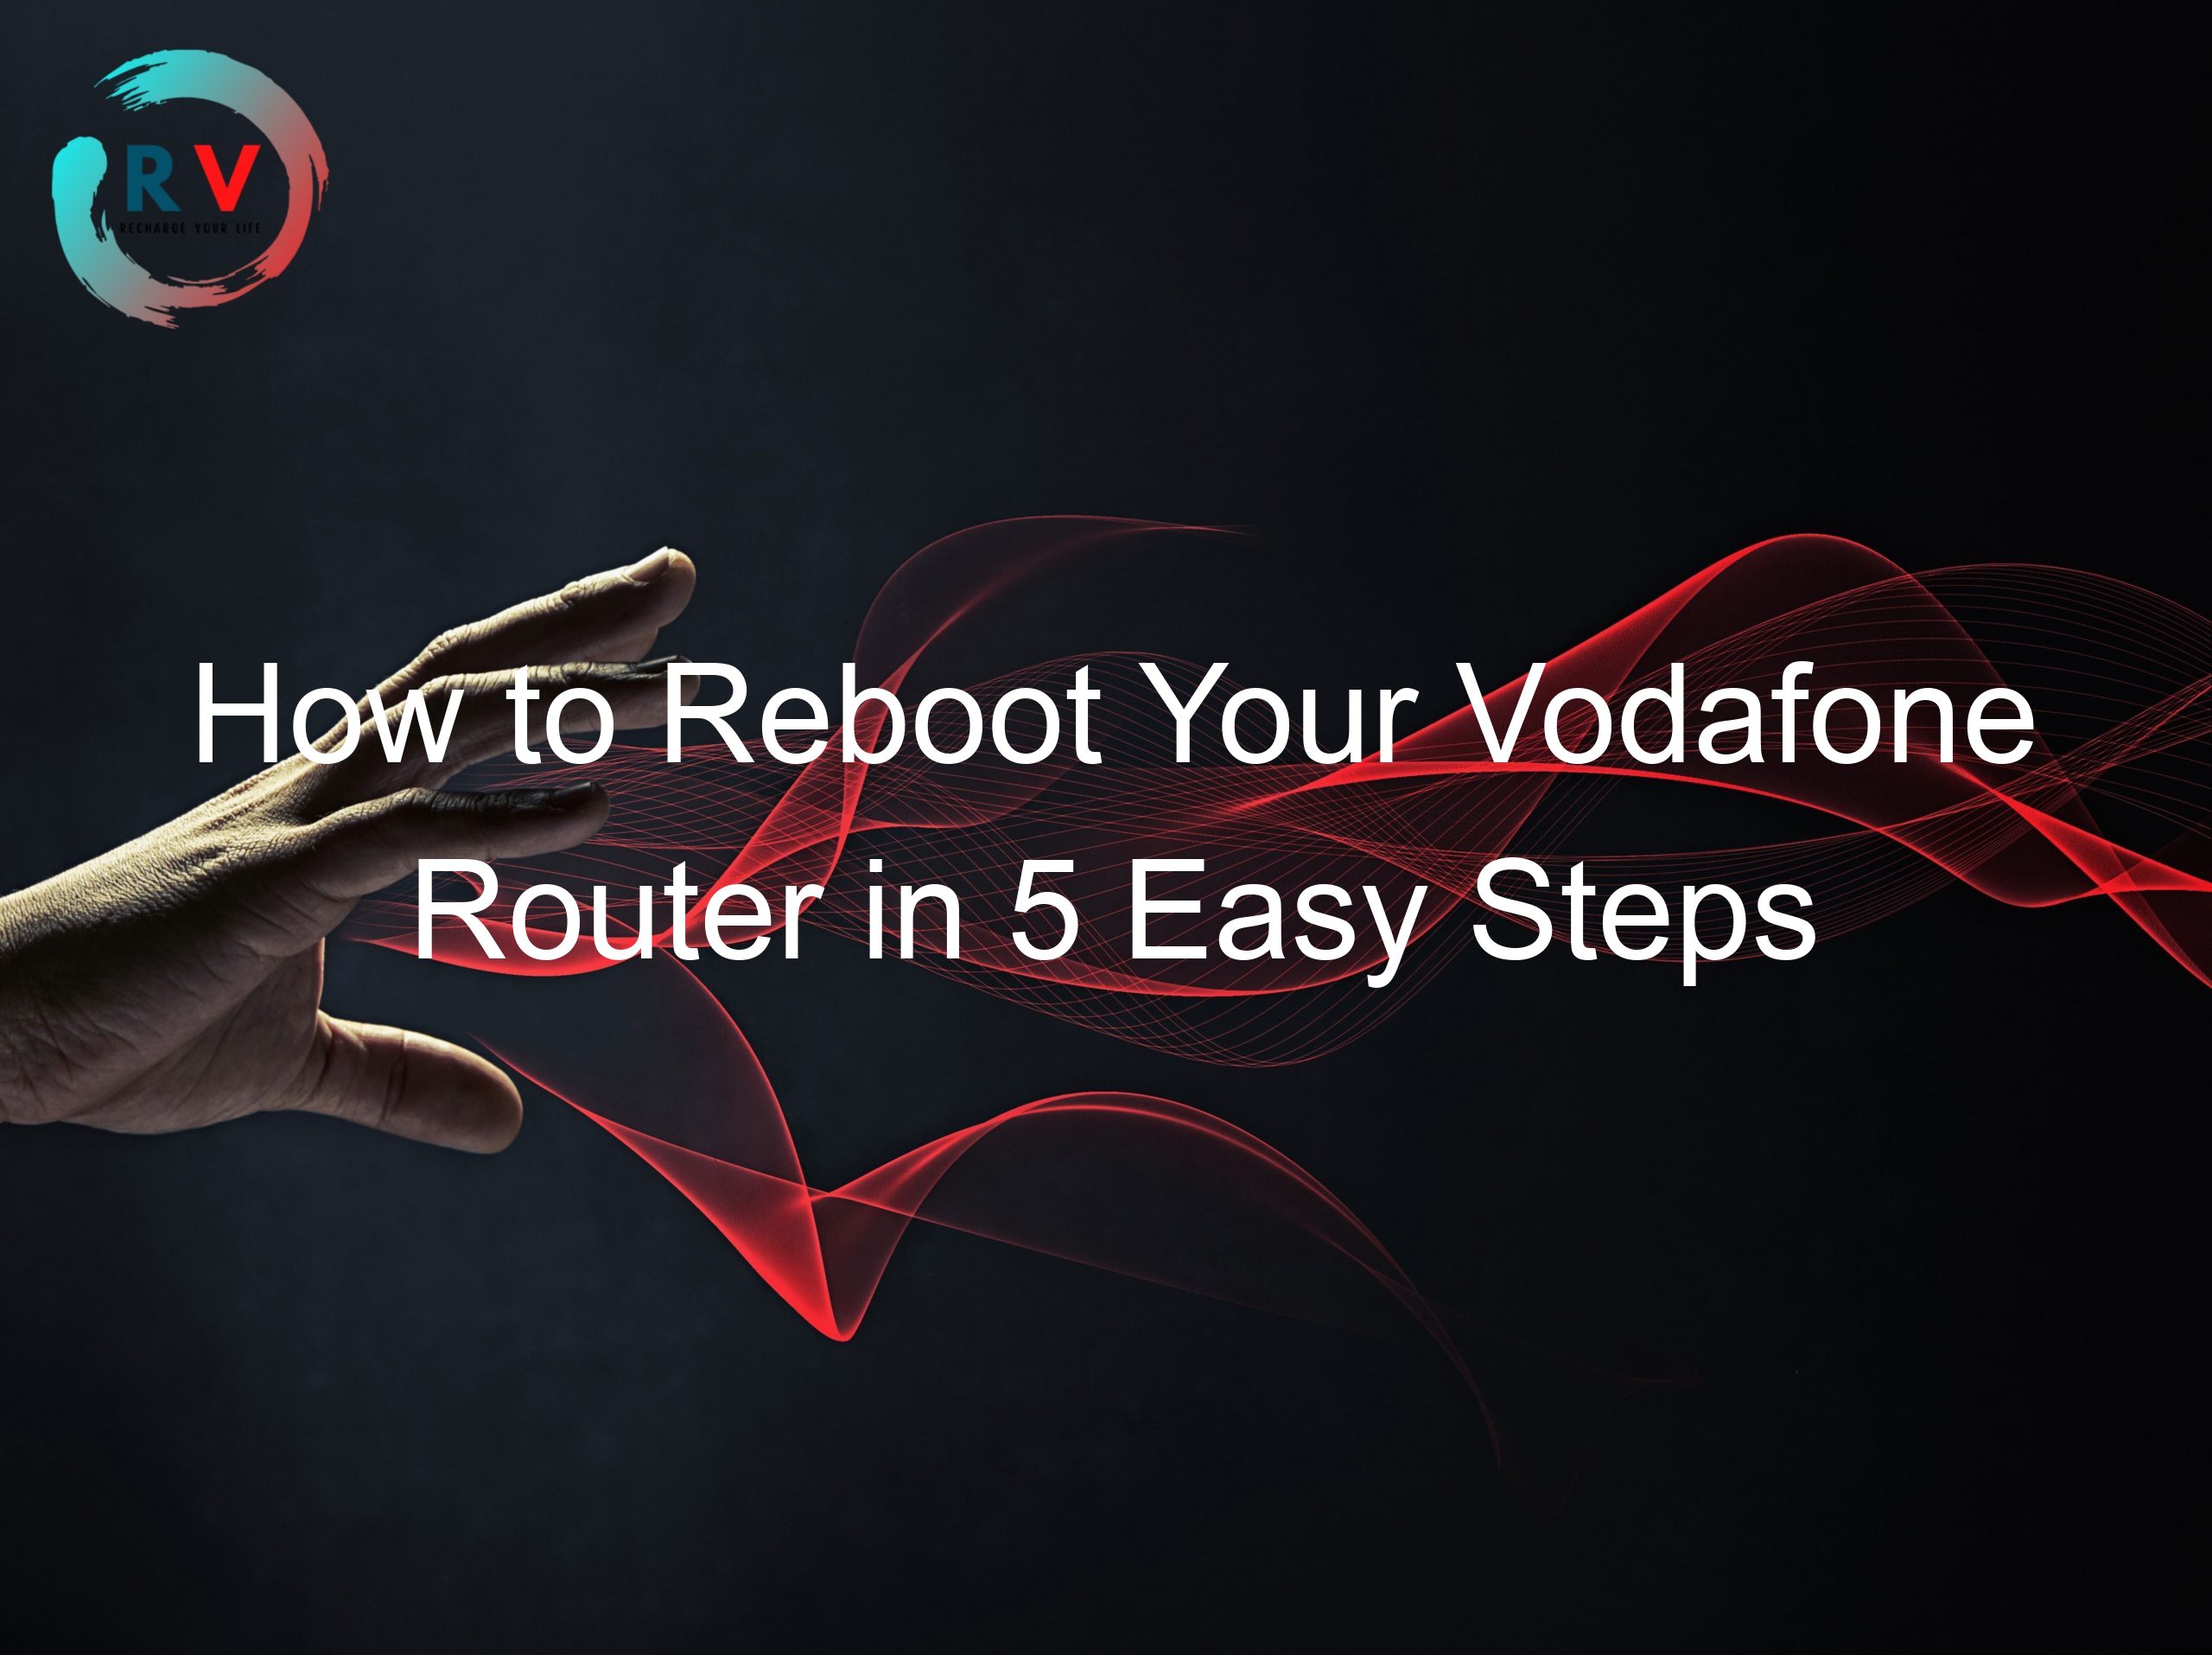 How to Reboot Your Vodafone Router in 5 Easy Steps